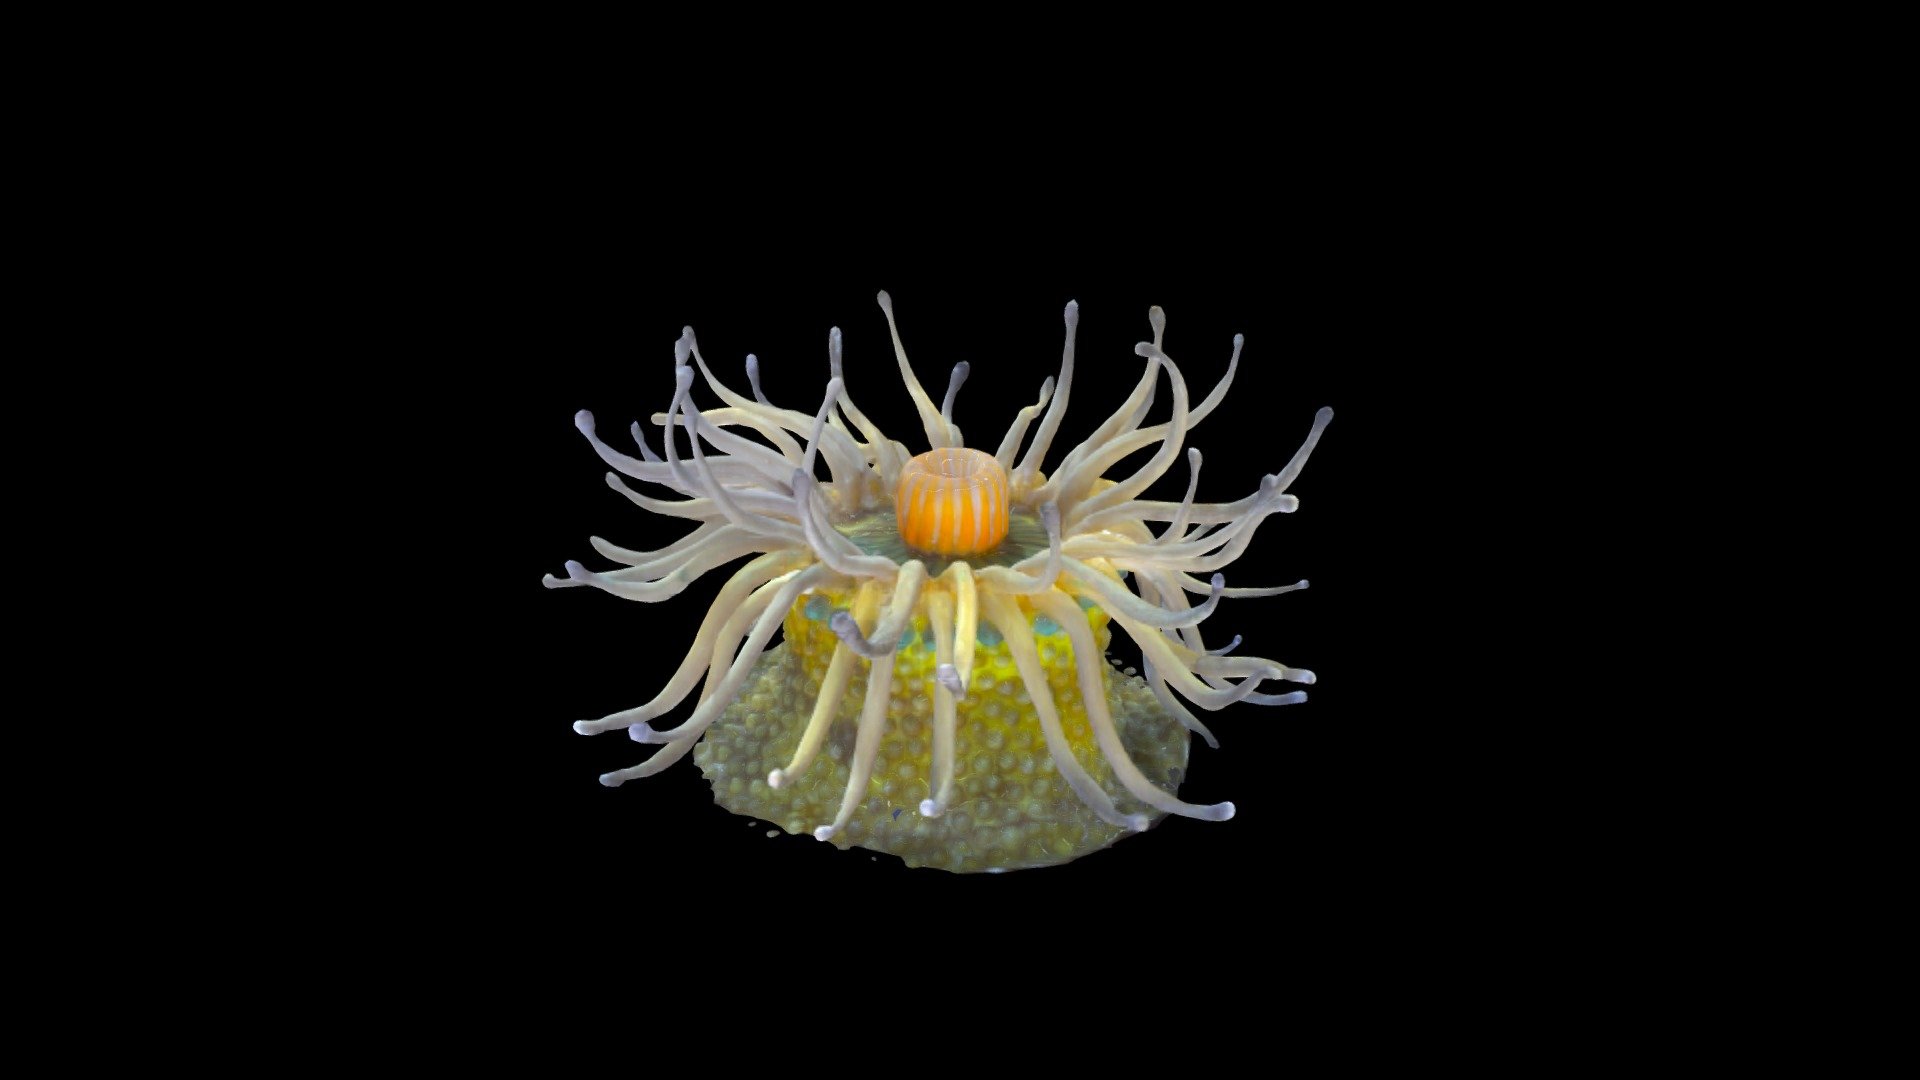 Model SC-51  of the Harvard Museum of Comparative Zoology Collection of Blaschka Marine Invertebrates. This is an ~ 4-inch glass model of a sea anemone (“Phymactis pustulata”). This species of anemone is found in the Western South Atlantic, living in intertidal zones.
           The glass model was made by the father-and-son team Rudolf and Leopold Blaschka in the late 1800s. Originally made as educational models, they are now in collections in over 50 institutions including Cornell, the Corning Glass Museum, Harvard and University College, Dublin. 
The model was made from 220 photographs with processing in Agisoft Photoscan and touch-up in Blender. (model # A2-df5-s2dec-6) - Blaschka Sea Anemone - 3D model by ARC-3D -- Peter Fried (@ARC-3D) 3d model